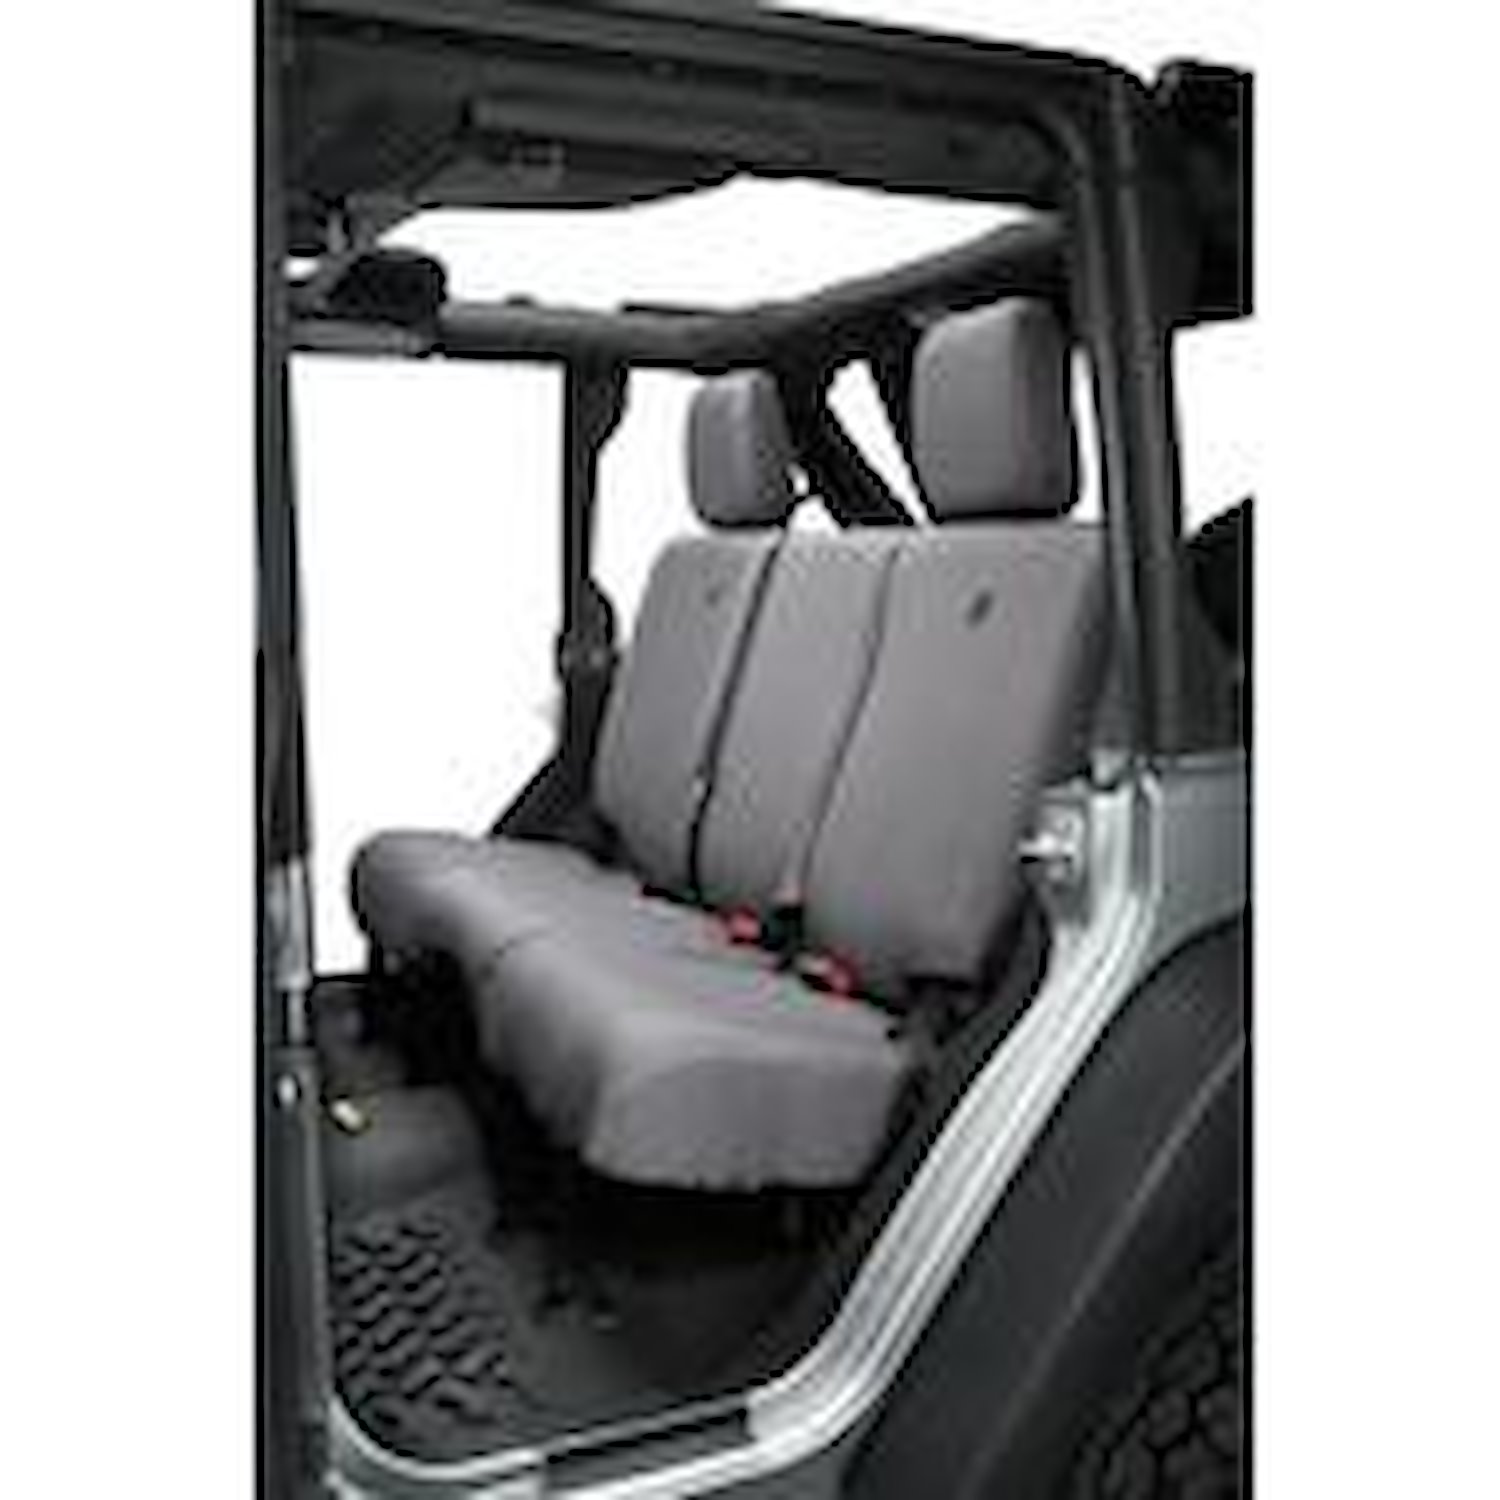 Seat Covers, Charcoal/Gray, Fits Factory Seats w/Fold Down Arm Rests, Sold Individually,